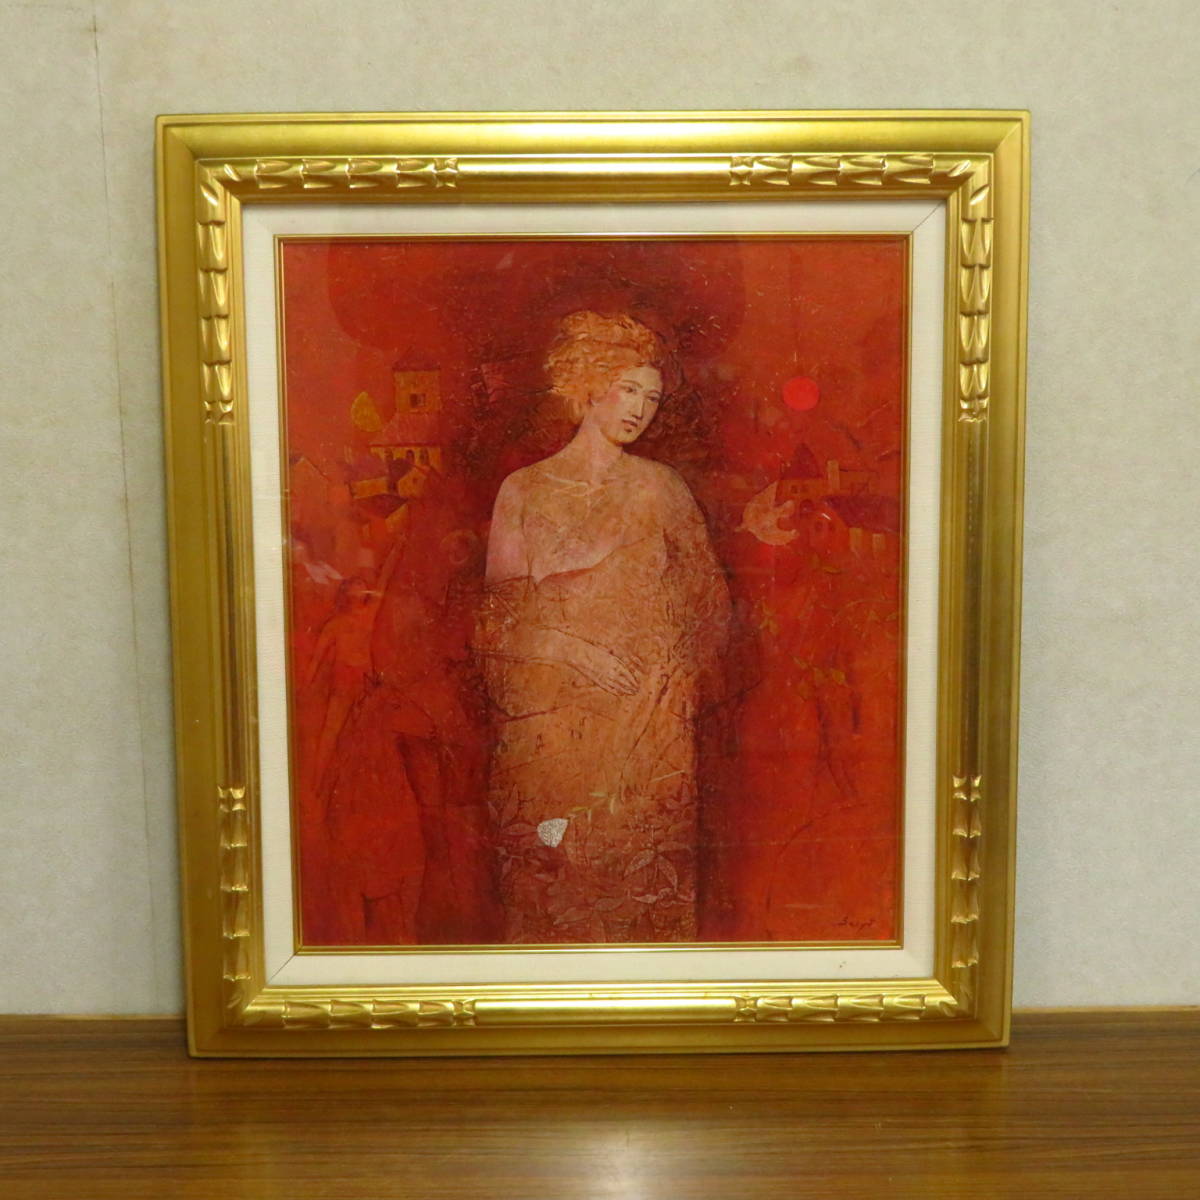 Guarantee included Authenticity Artwork [Living Things (Mother and Child) / Seisuke Matsubara] Oil painting, oil painting, painting, figure painting, artwork, work of art, luxuriously framed, signed by the artist, 62.5 x 70, painting, oil painting, portrait